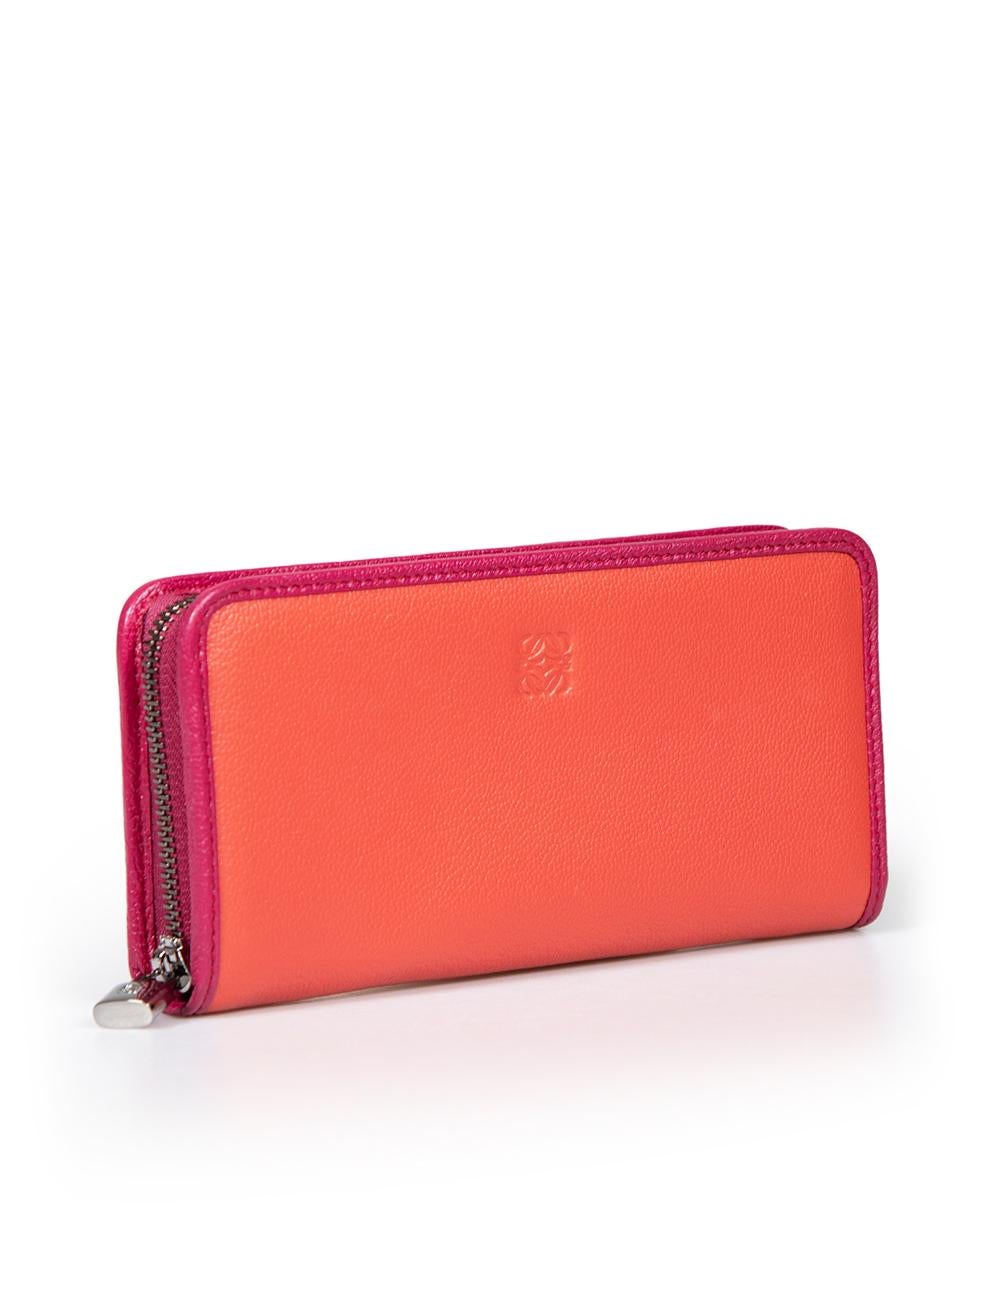 CONDITION is Never worn. No visible wear to wallet is evident on this new Loewe designer resale item. This item comes with original box and dust bag.
 
 
 
 Details
 
 
 Model: Amazona
 
 Red
 
 Leather
 
 Long wallet
 
 Logo embossed on front
 
